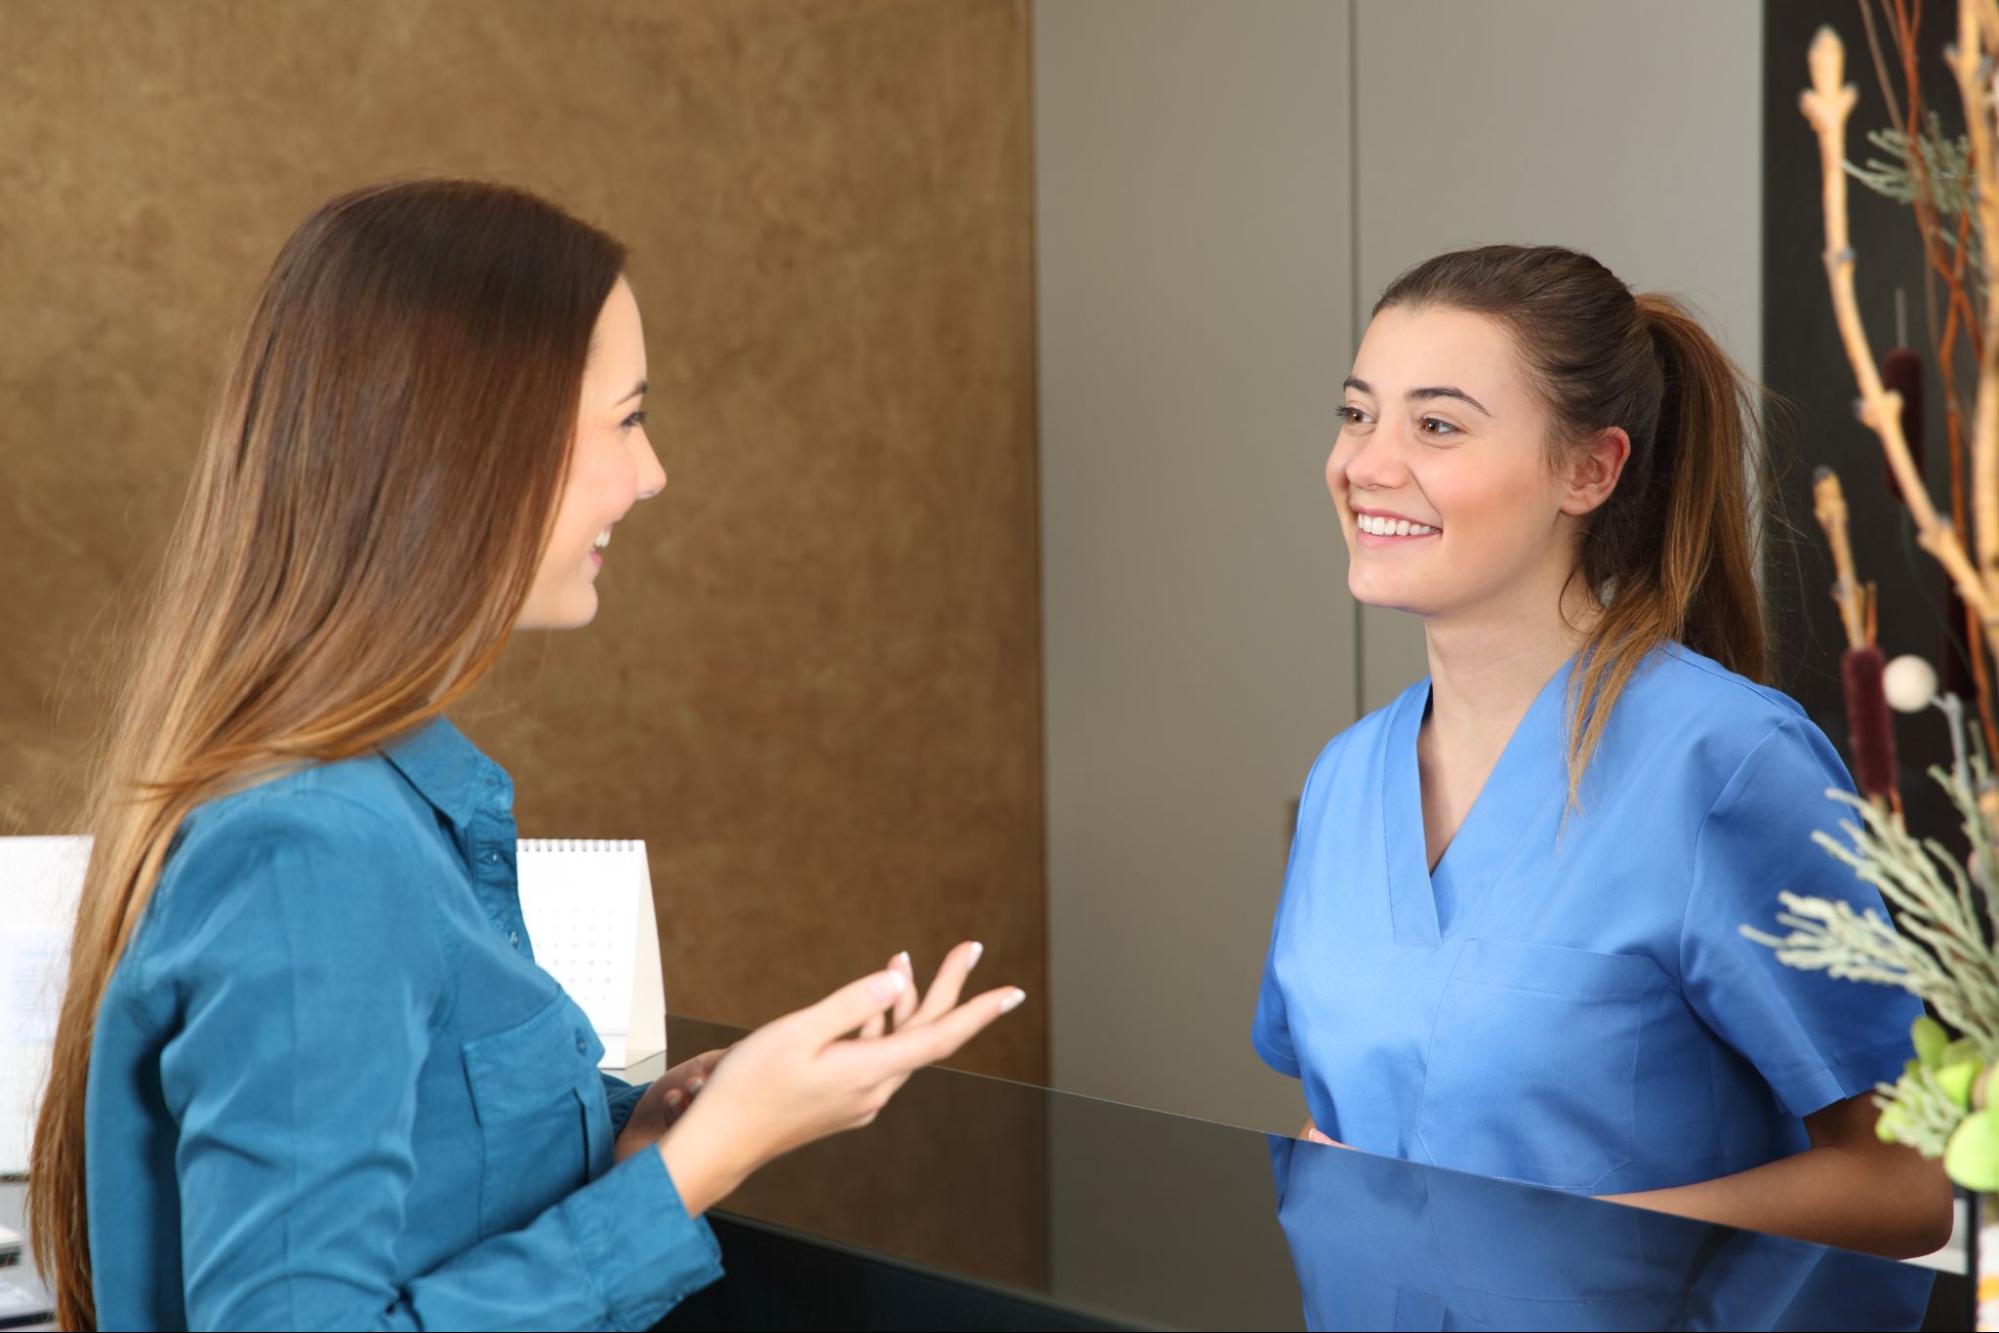 Do I Need A Tooth Extraction Before Orthodontic Treatment?